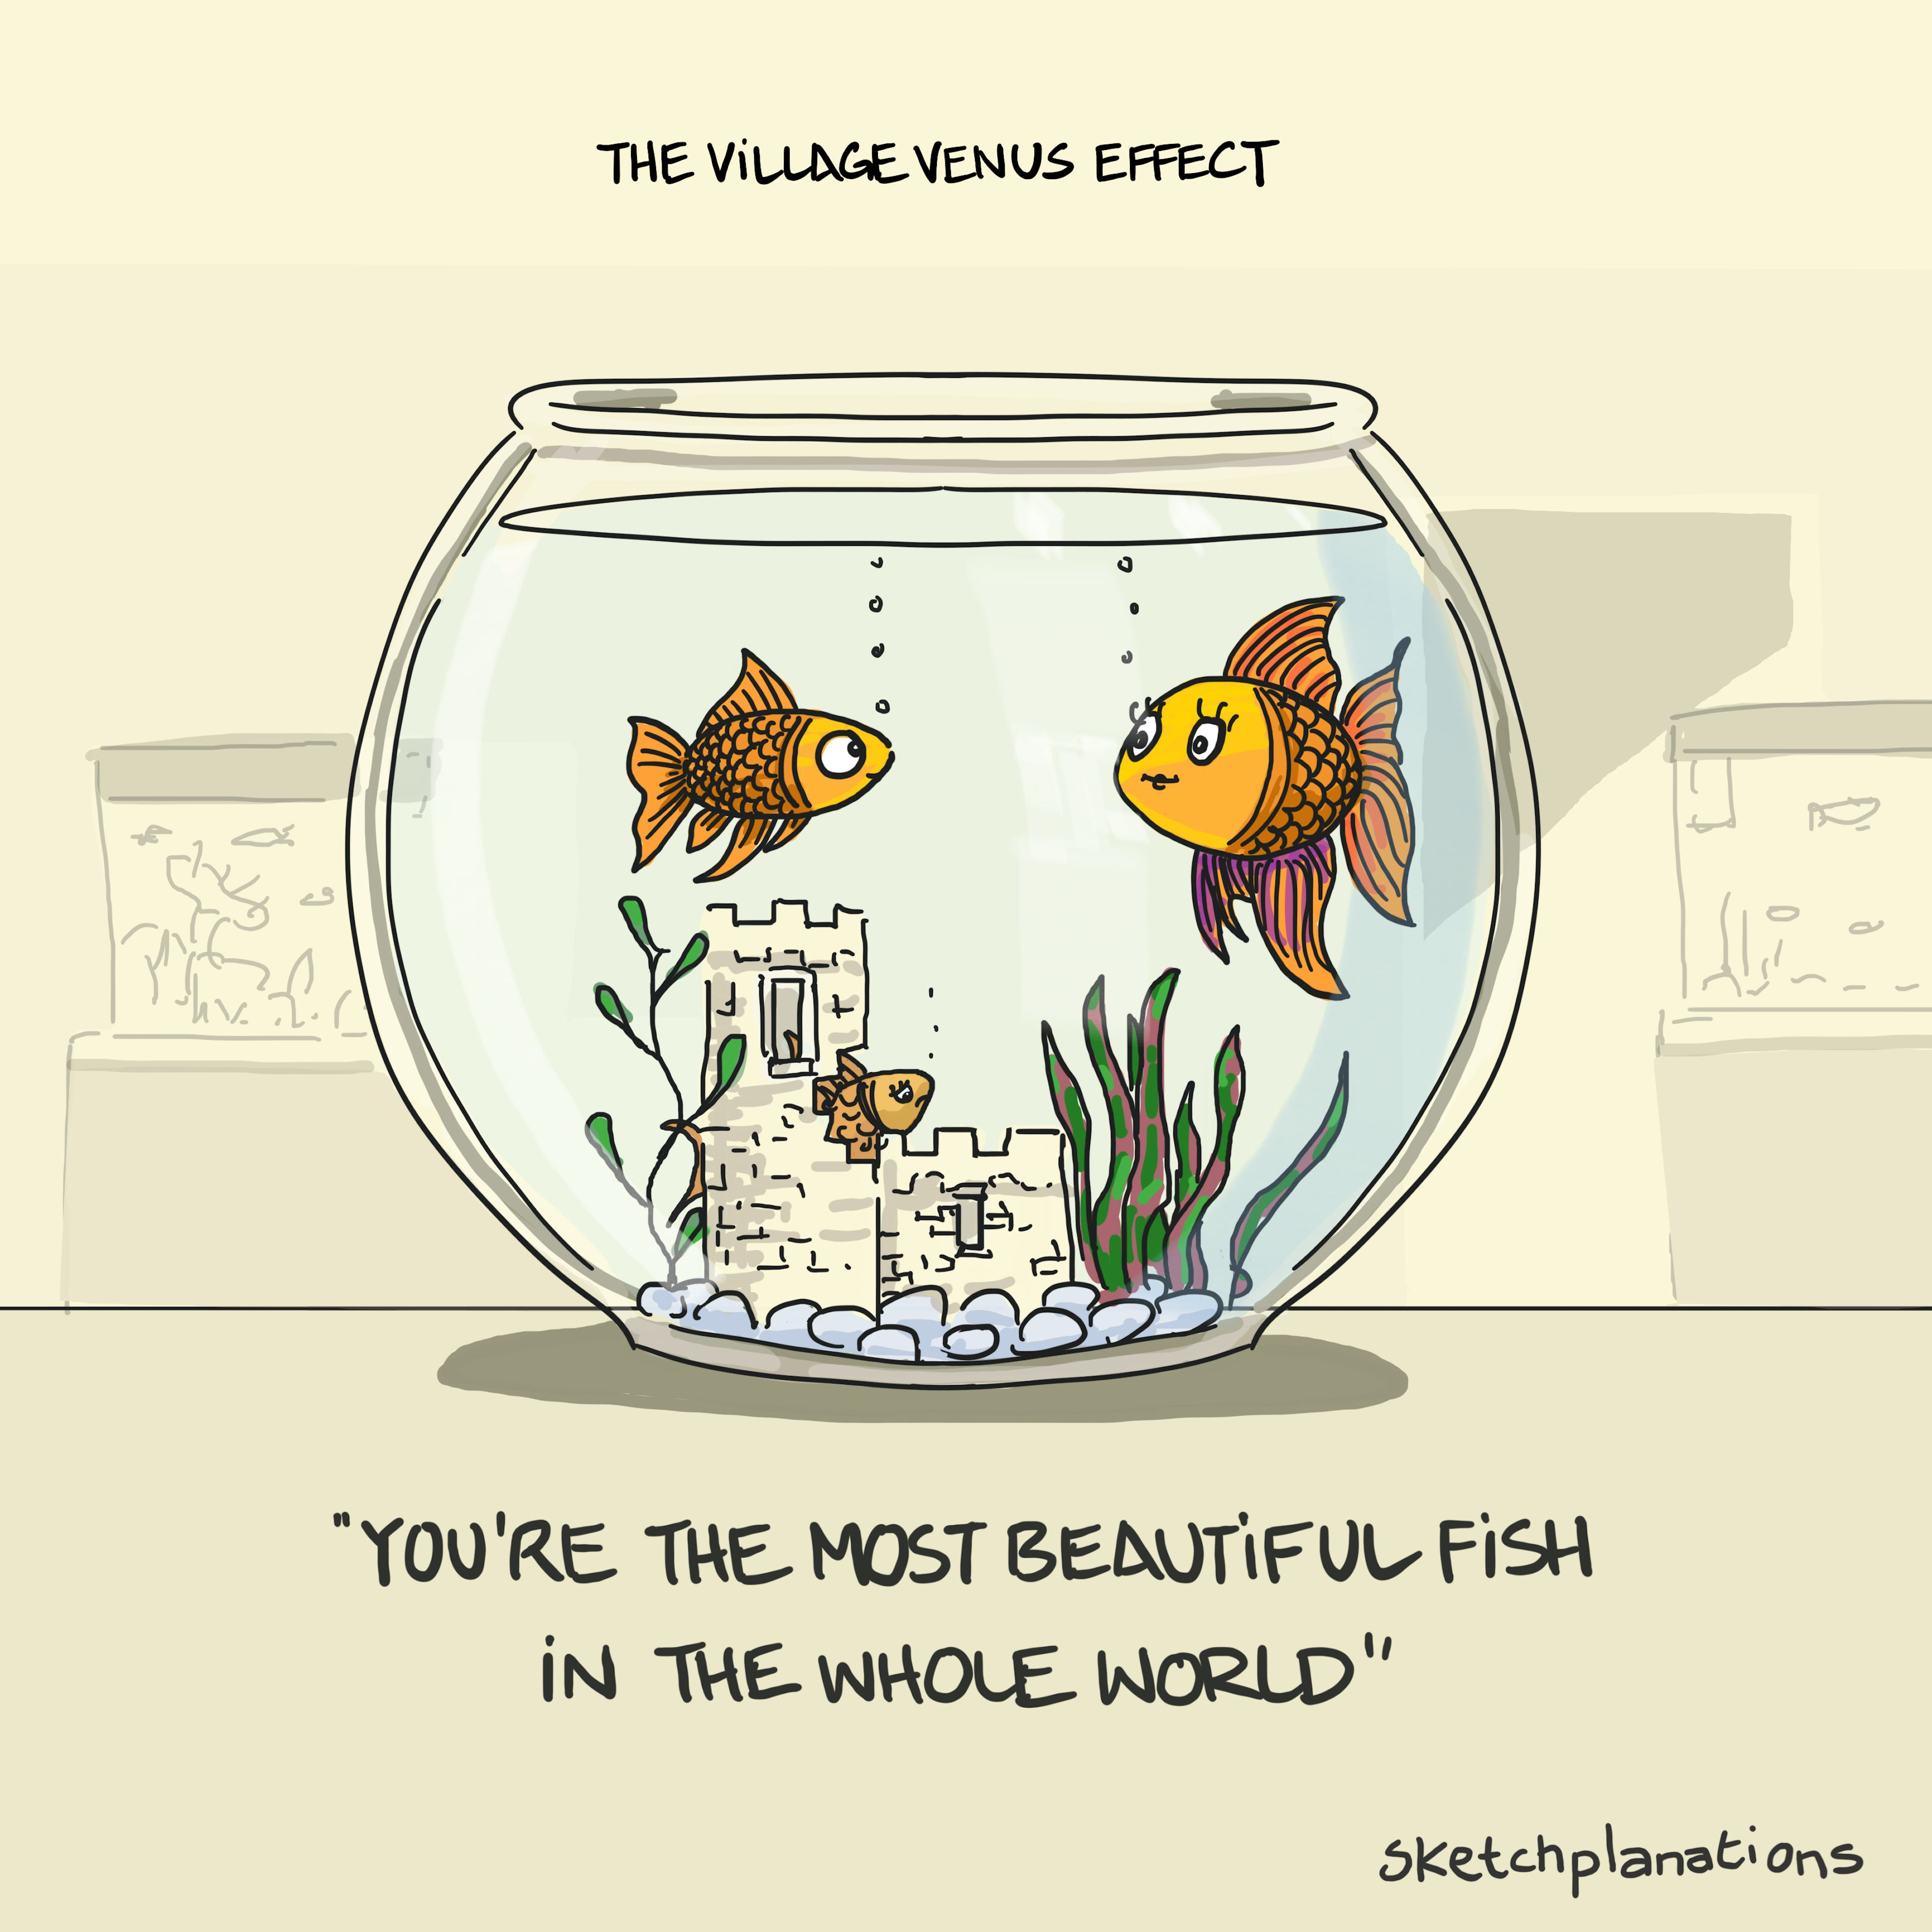 The Village Venus effect example, a term from Edward De Bono, with a fish declaring that another fish in the fish bowl is the most beautiful fish in the whole world